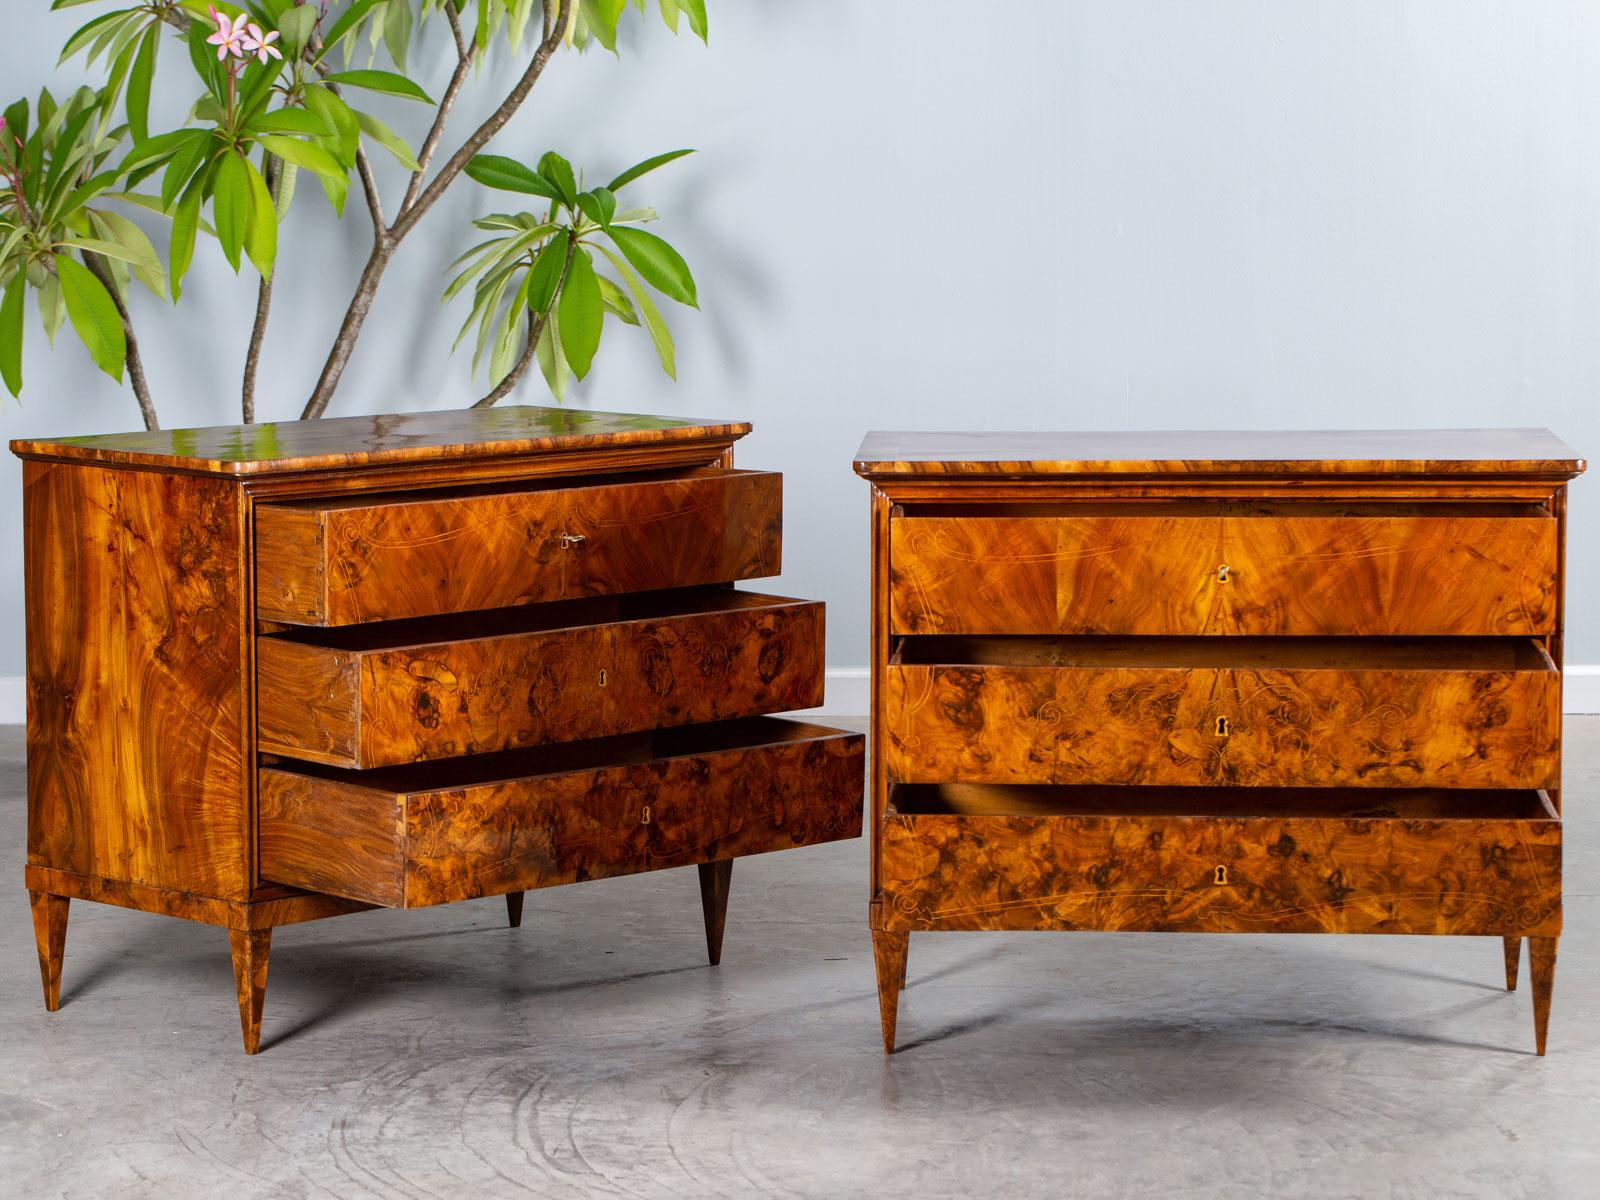 A pair of exceptional antique burl walnut with maple inlay chests of drawers, circa 1830s, possibly Spanish or French. The neoclassical styling of this pair of antique chests provides a marvelous framework for the organic pattern achieved by the use